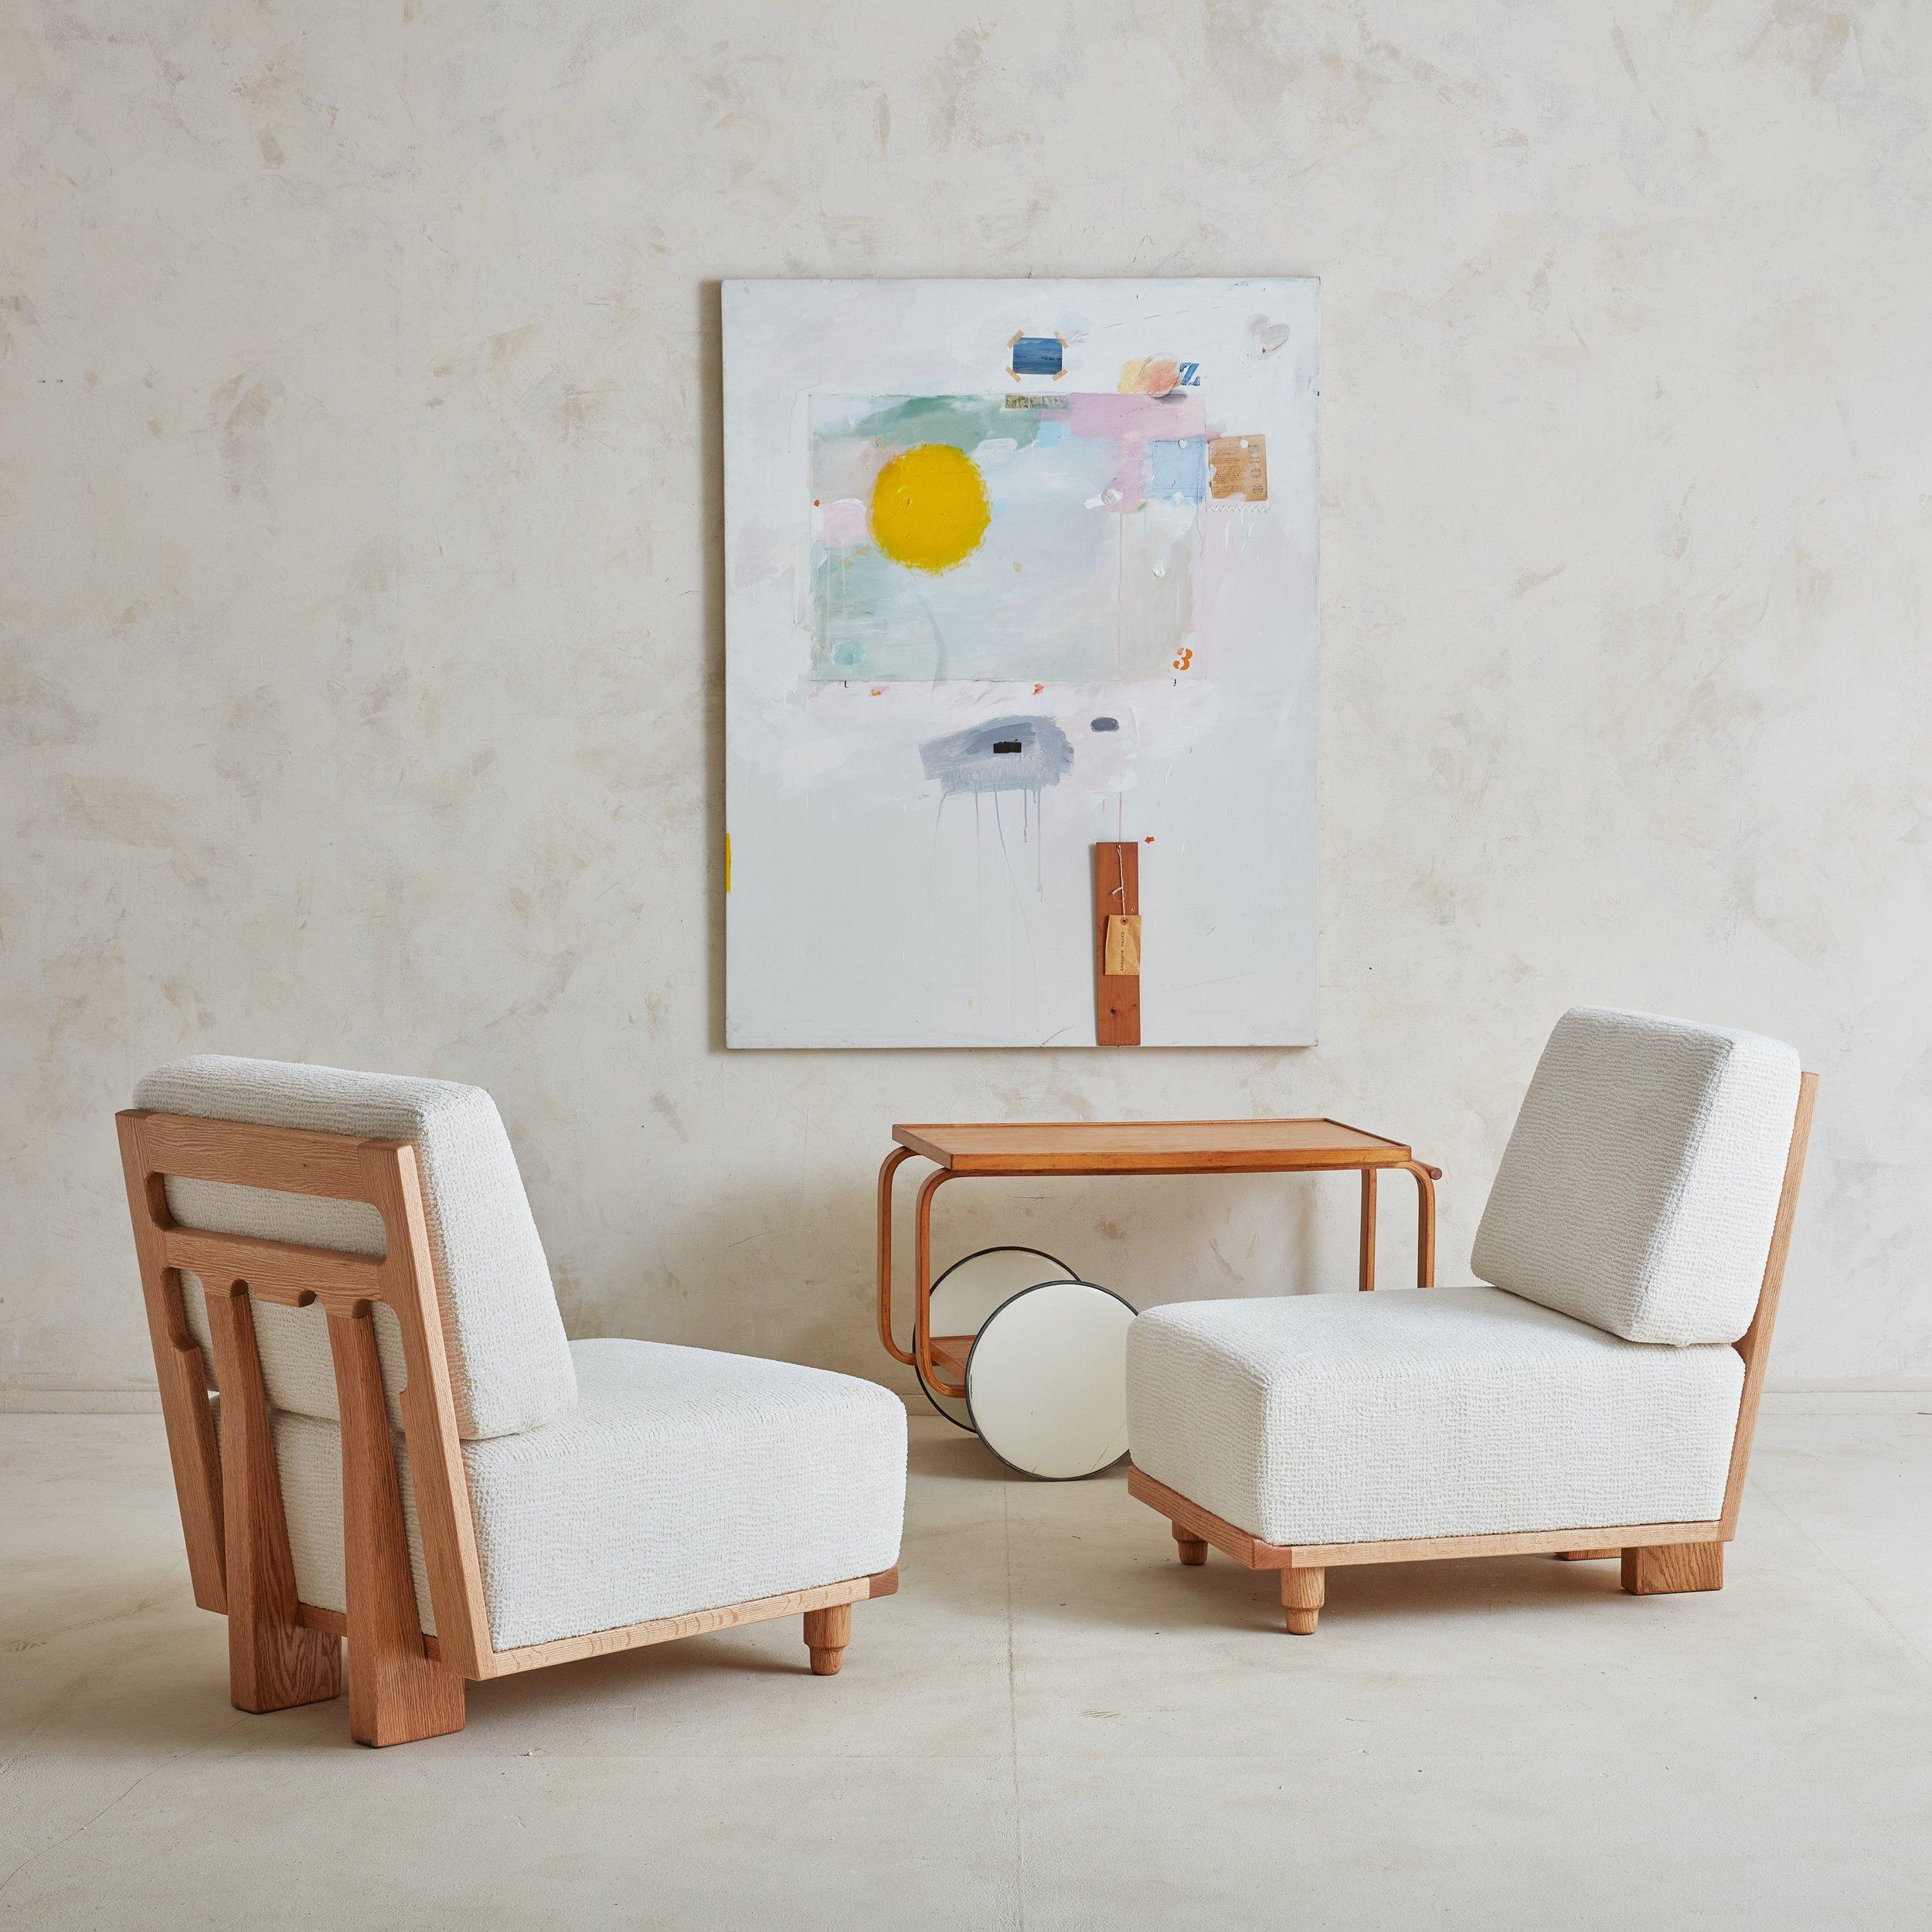 An earlier edition of the Alvar and Aino Aalto Tea Trolled for Artek. Using new technology to bend birch wood, the dynamic design duo created a heritage piece that has stood the test of time and for which the couple is famous for. This early model